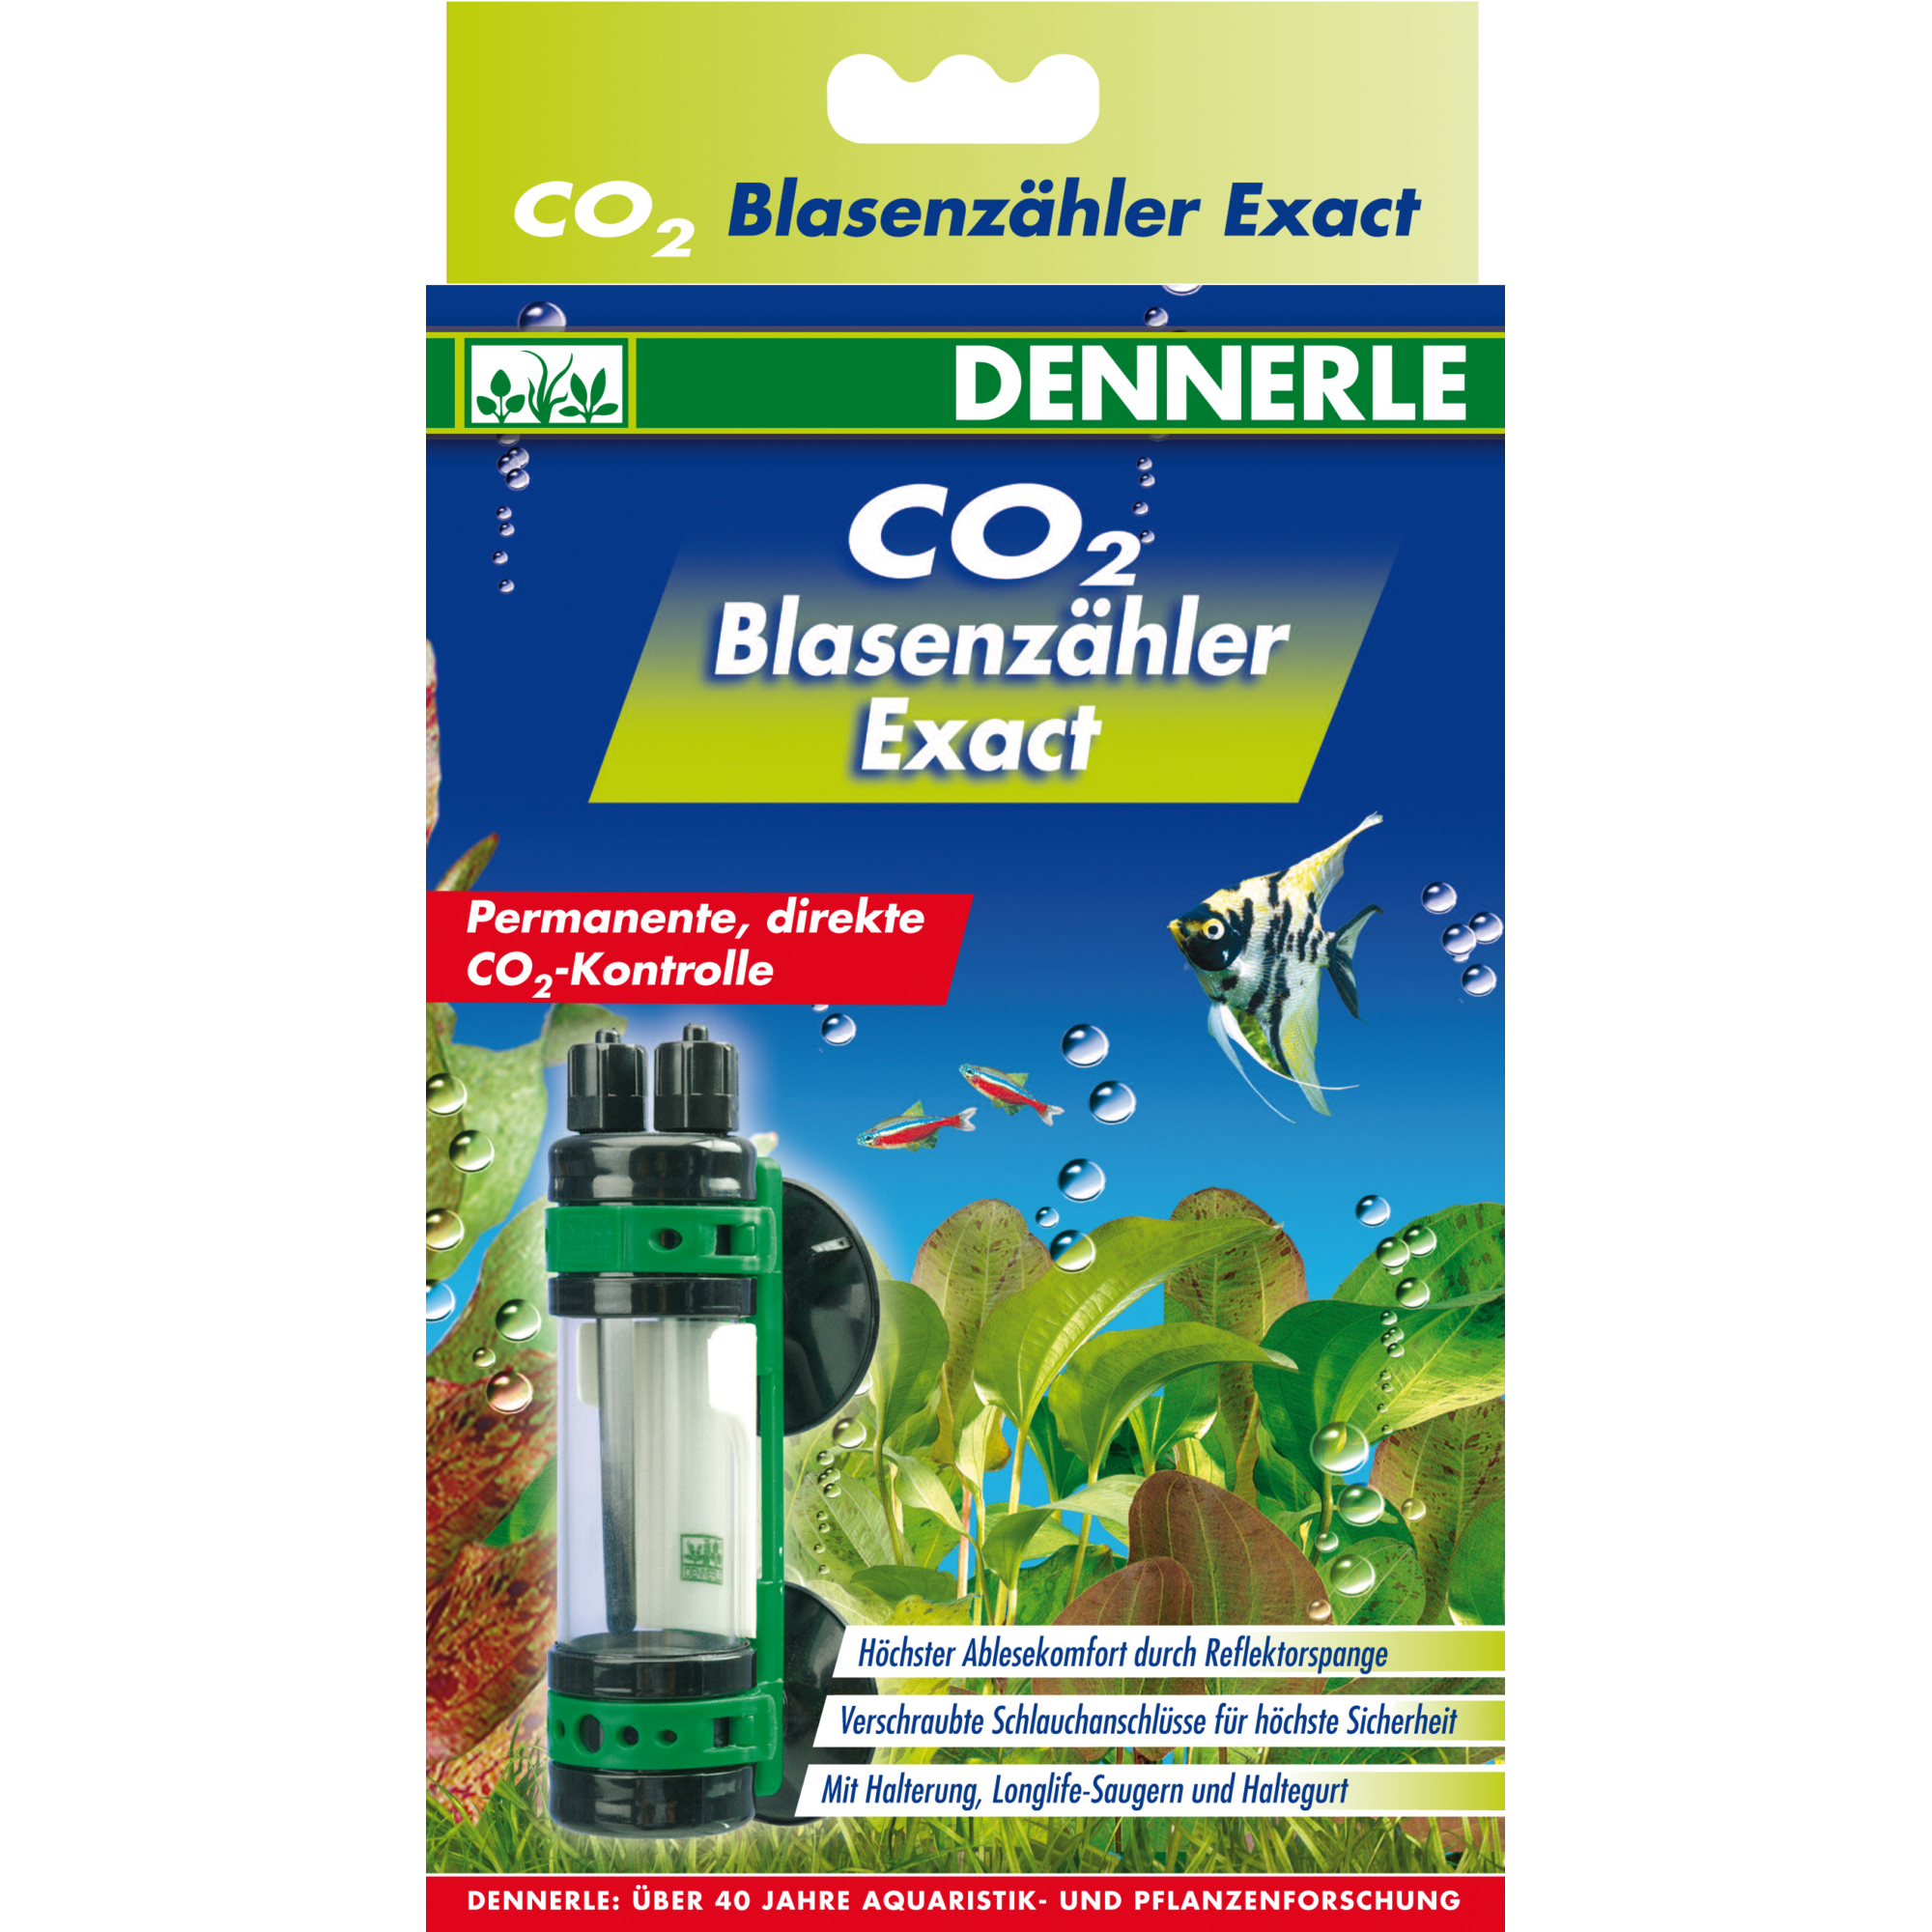 CO2 Blasenzähler Exact + product picture